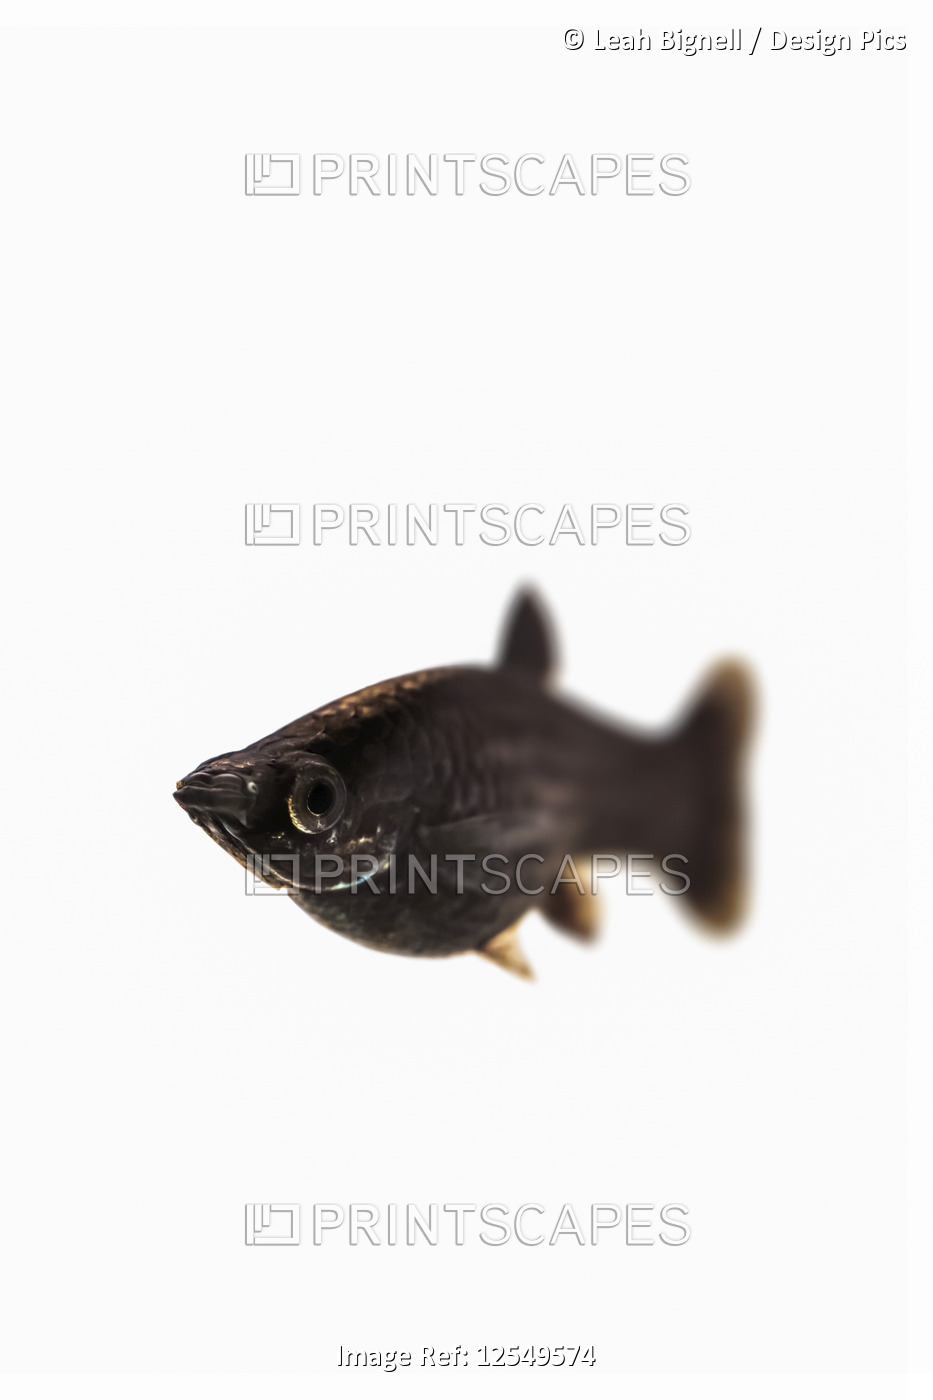 Black Common Molly fish (Poecilia sphenops) on a white background